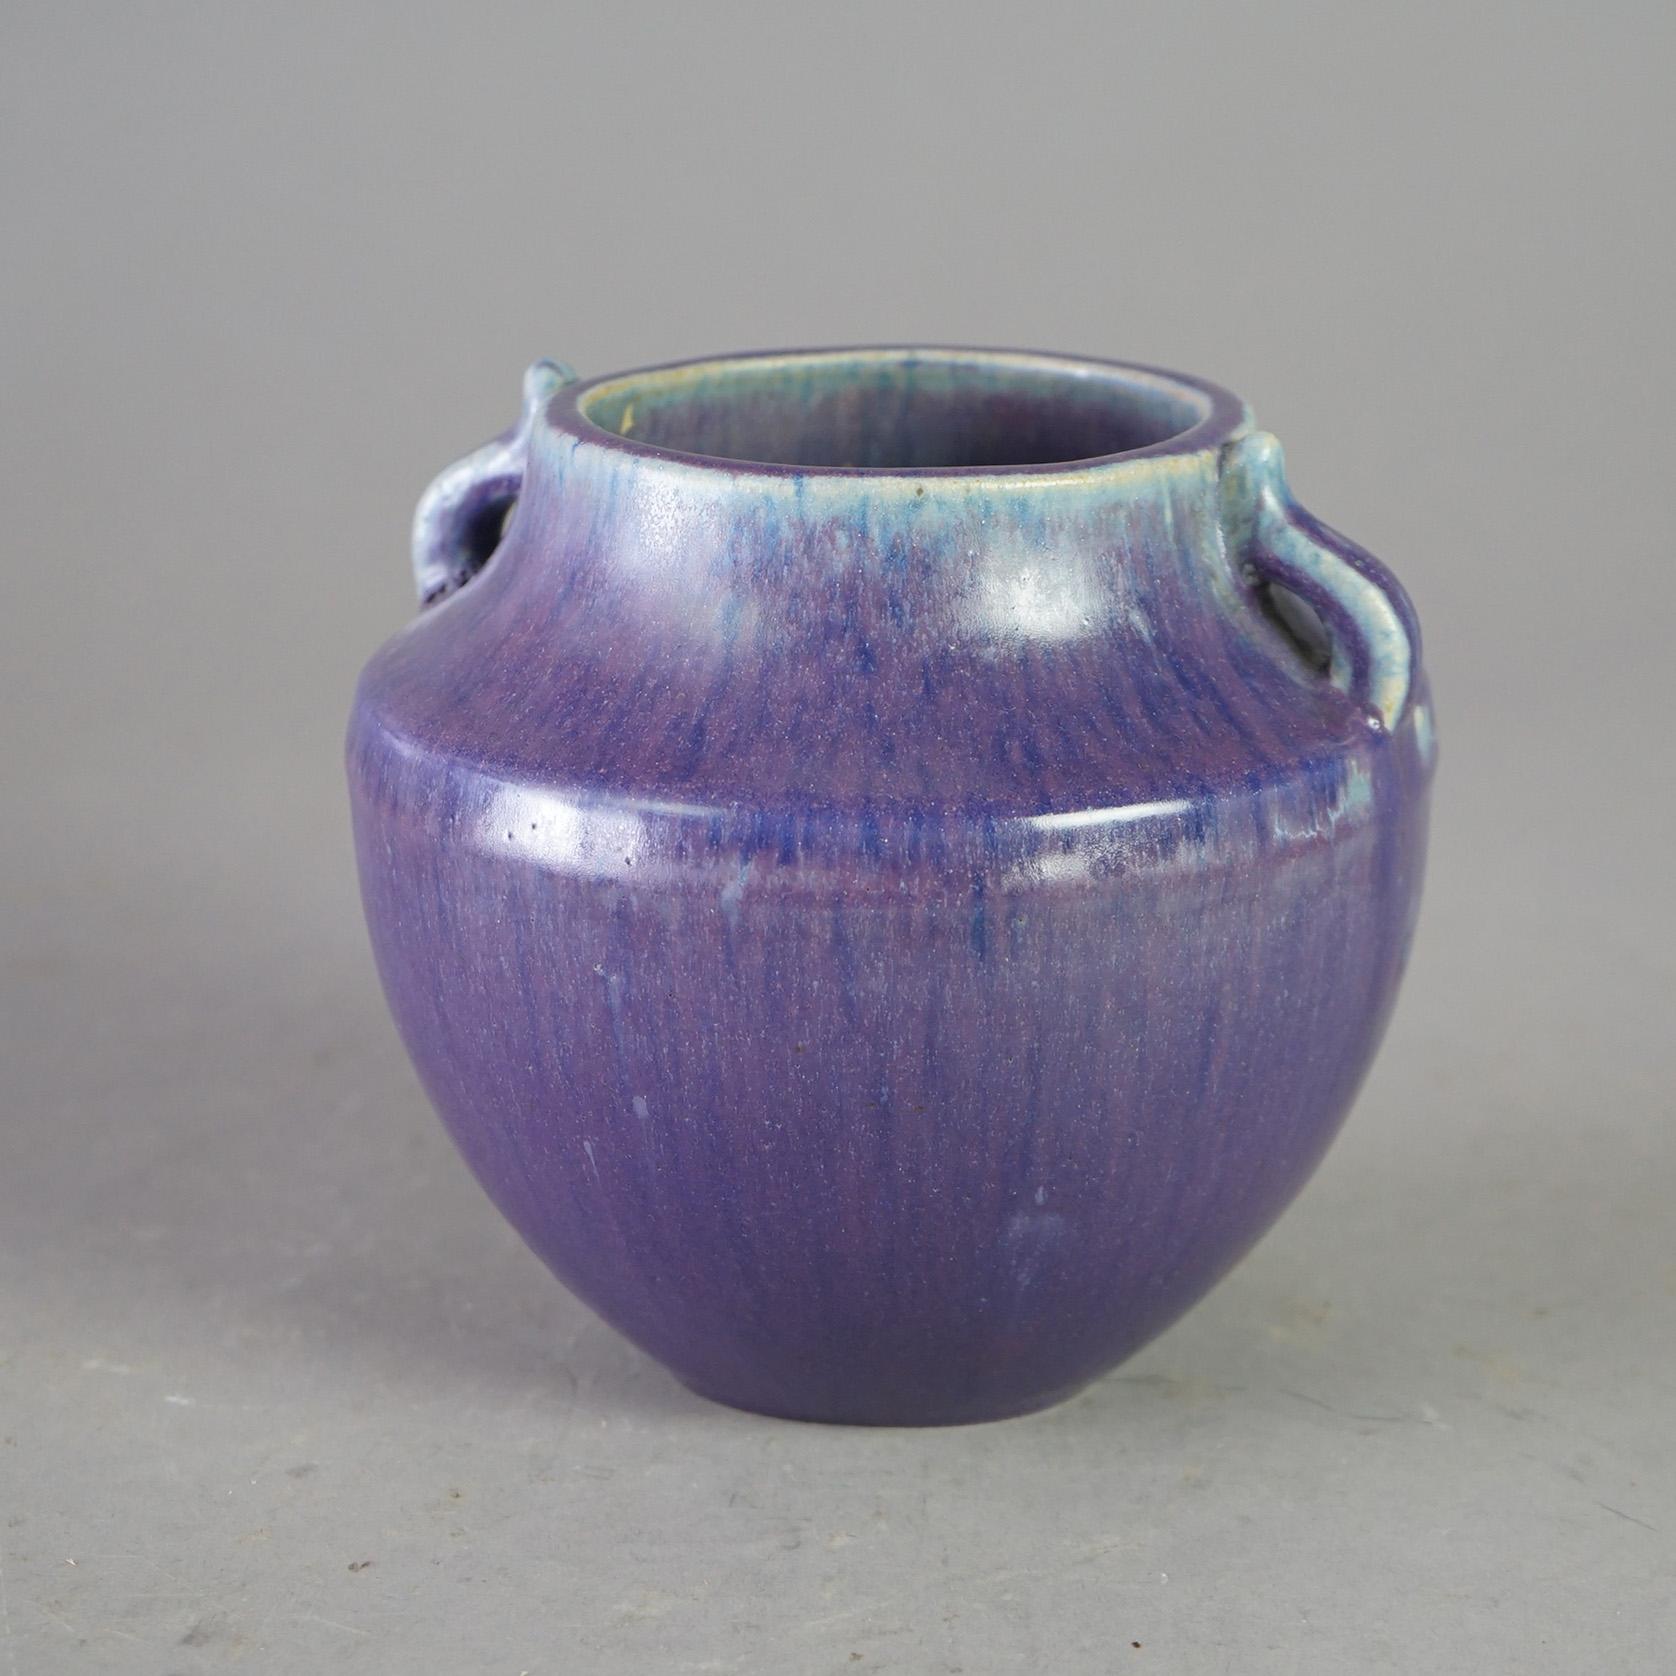 An antique vase by Fulper offers art pottery construction with double handles, glazing and maker mark on the base as photographed, c1920

Measures - 6